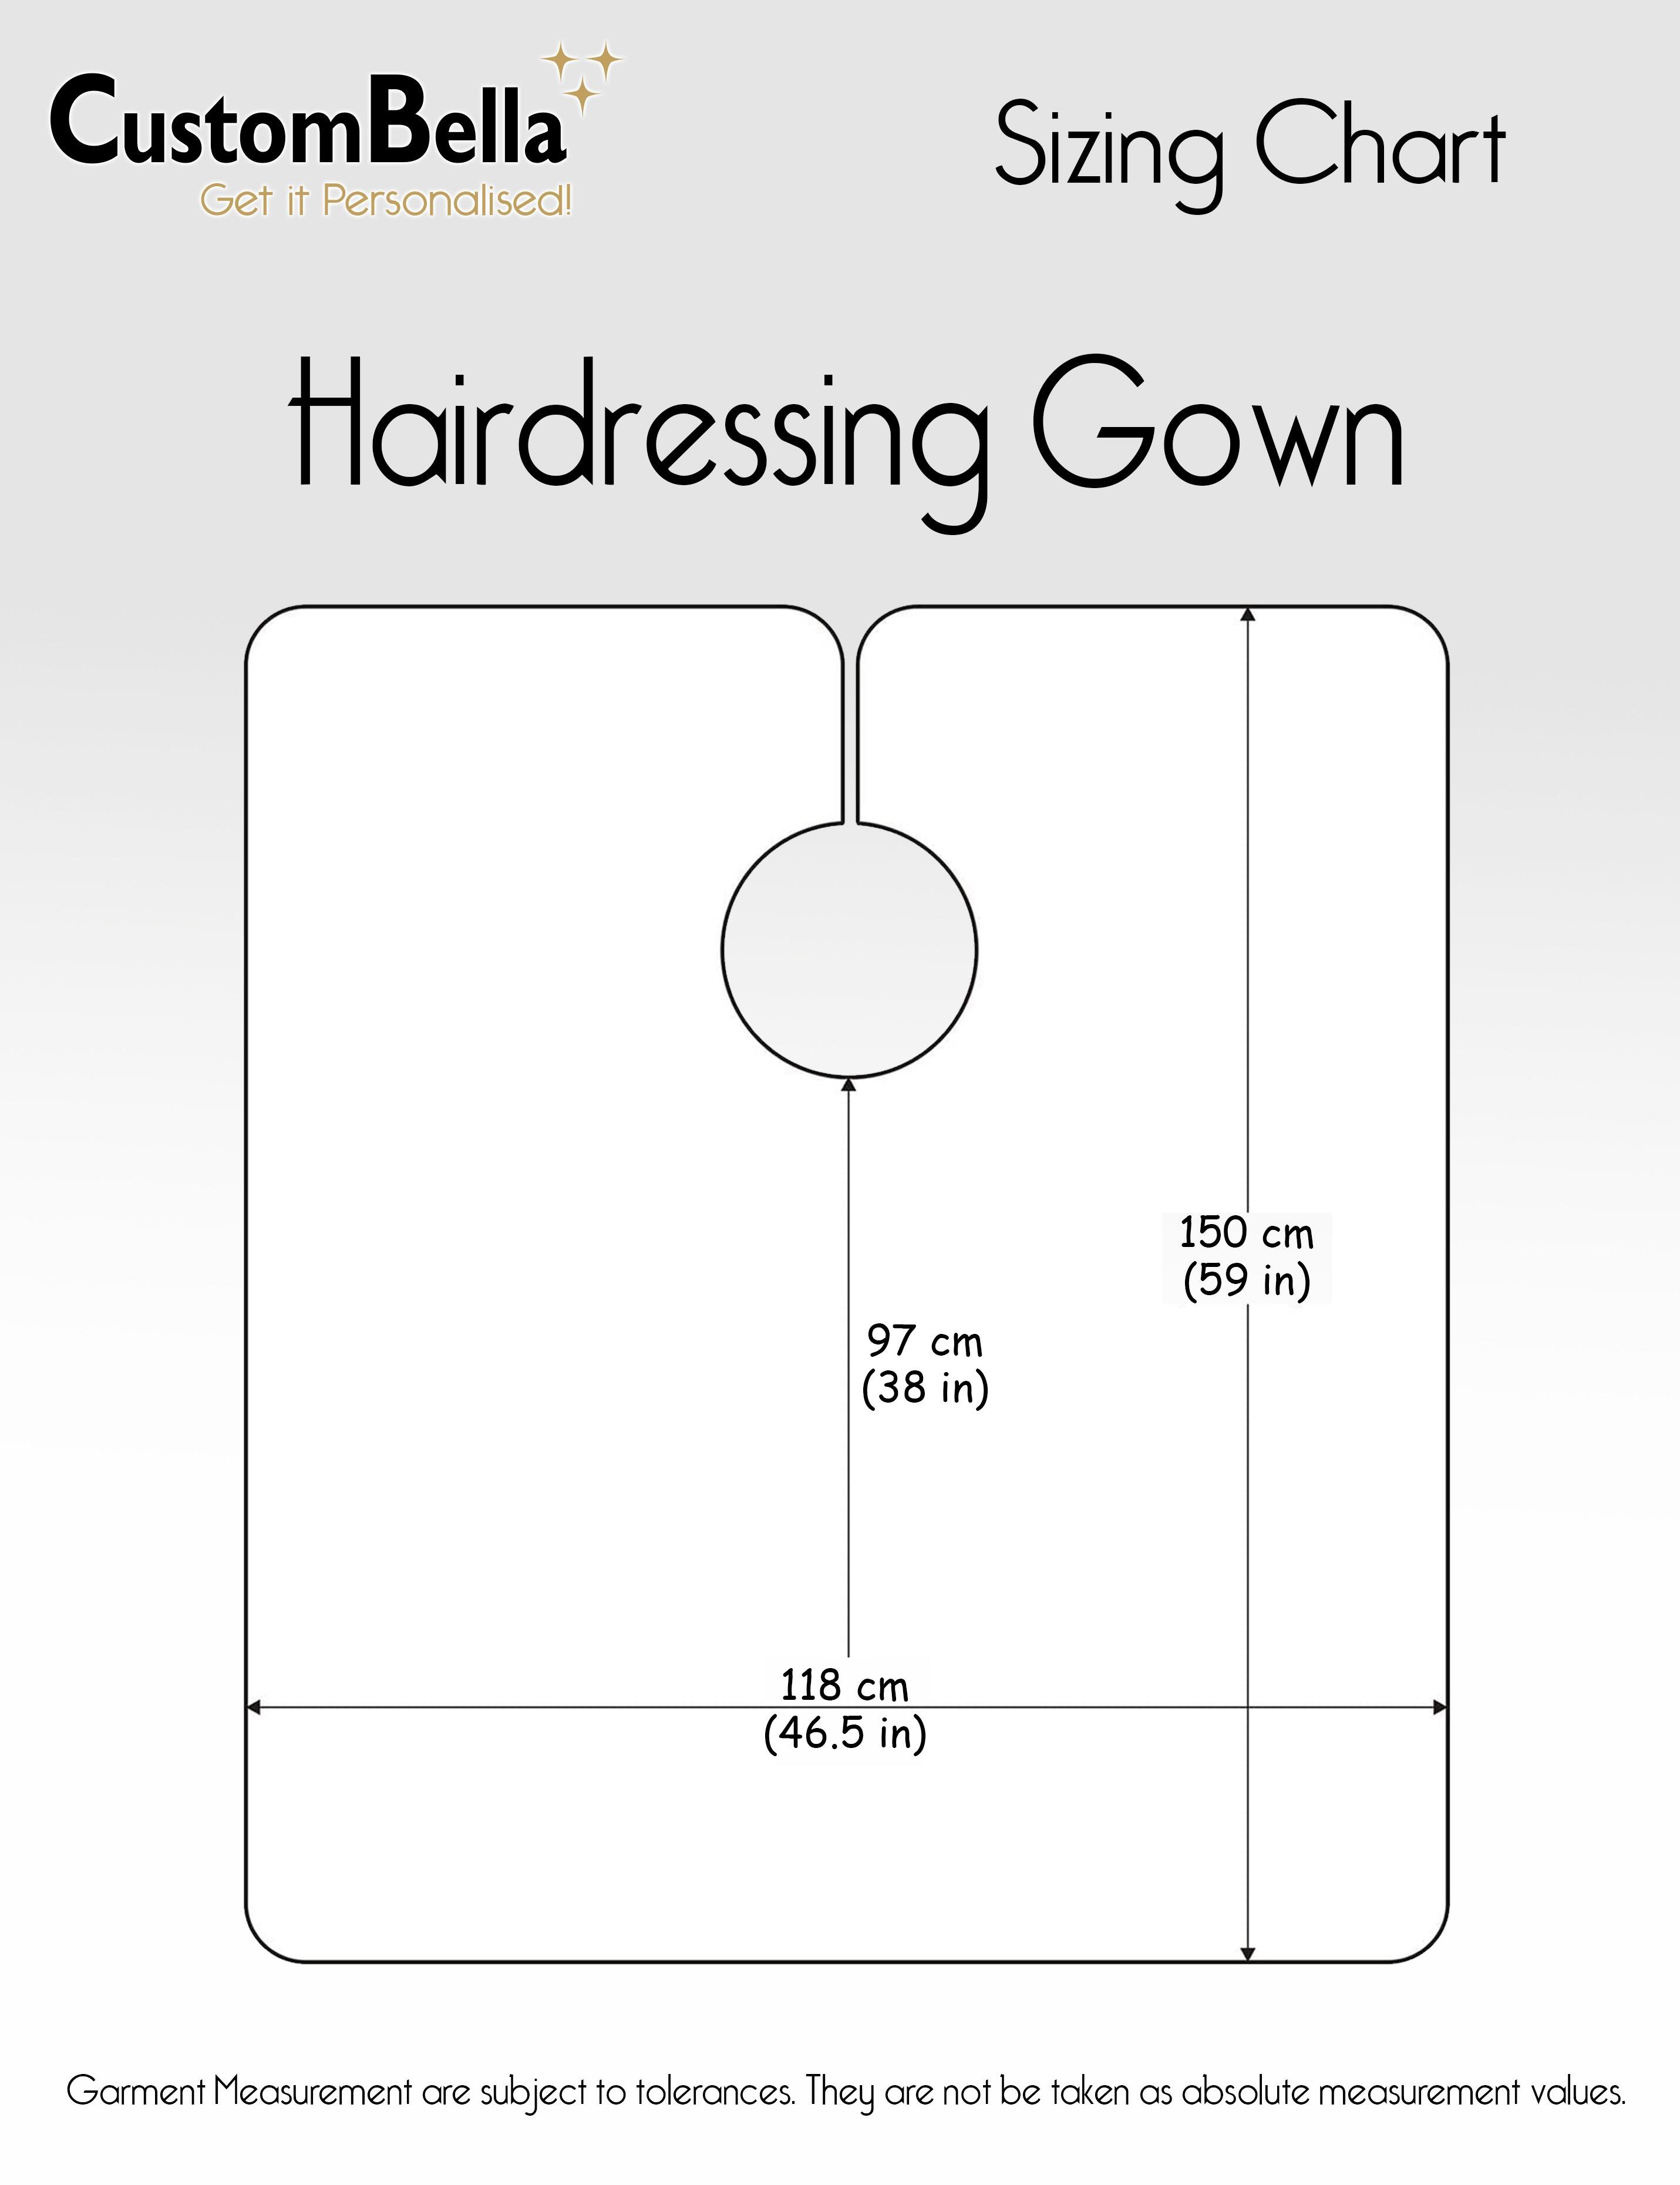 Personalised Photo Printed Professional Hairdressing Gown size chart